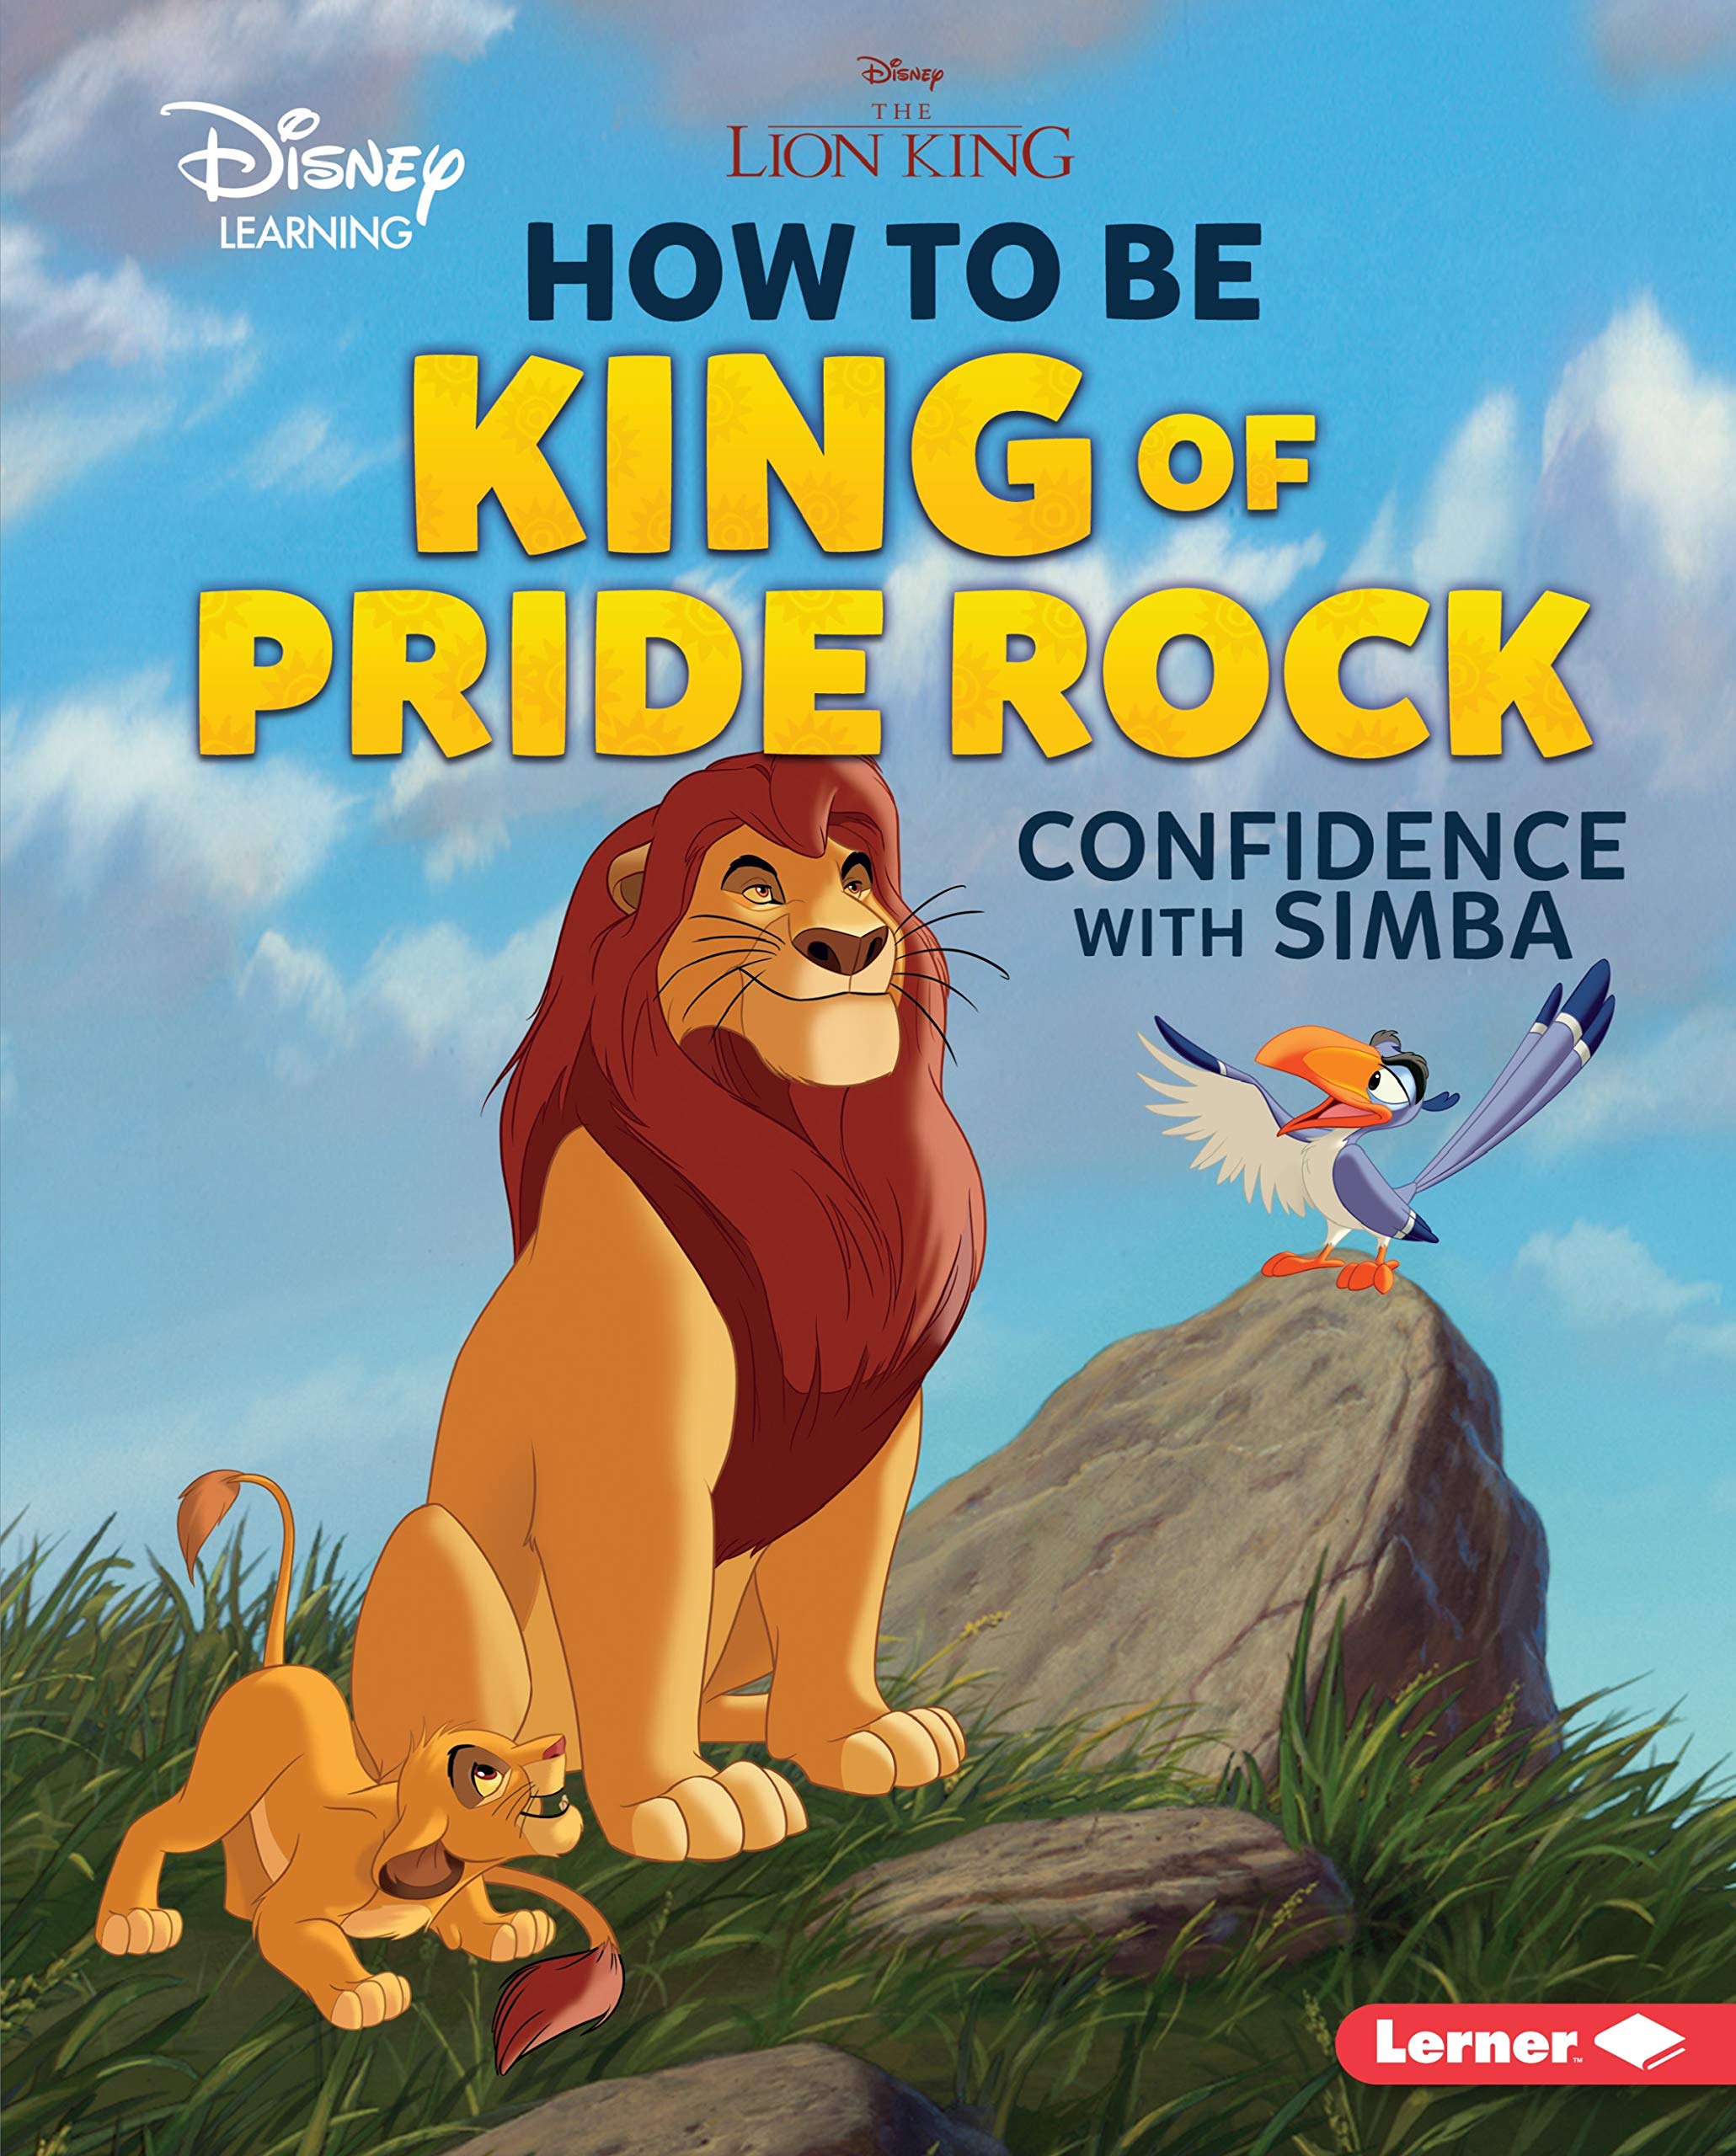 Lerner-Disney-Learning-How-to-be-King-of-Pride-Rock-by-Mari-Schuh